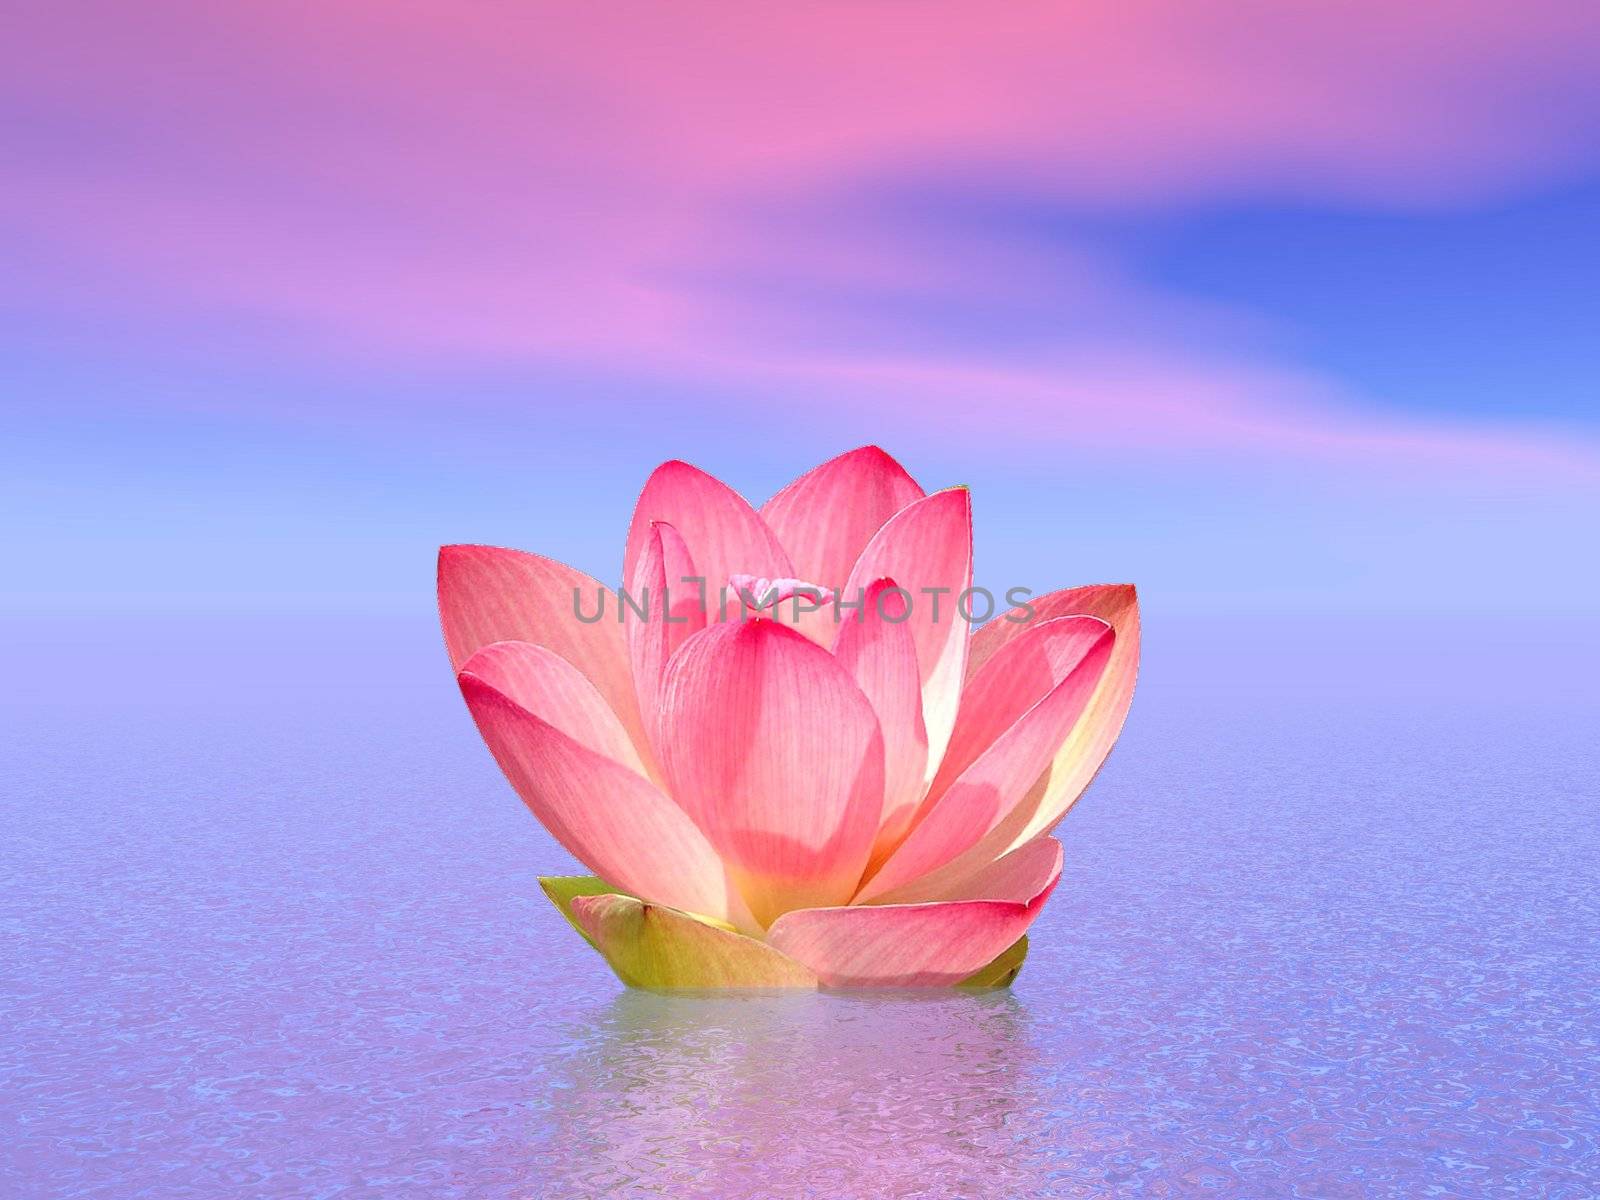 Pink lily flower on the water under cloudy morning sky